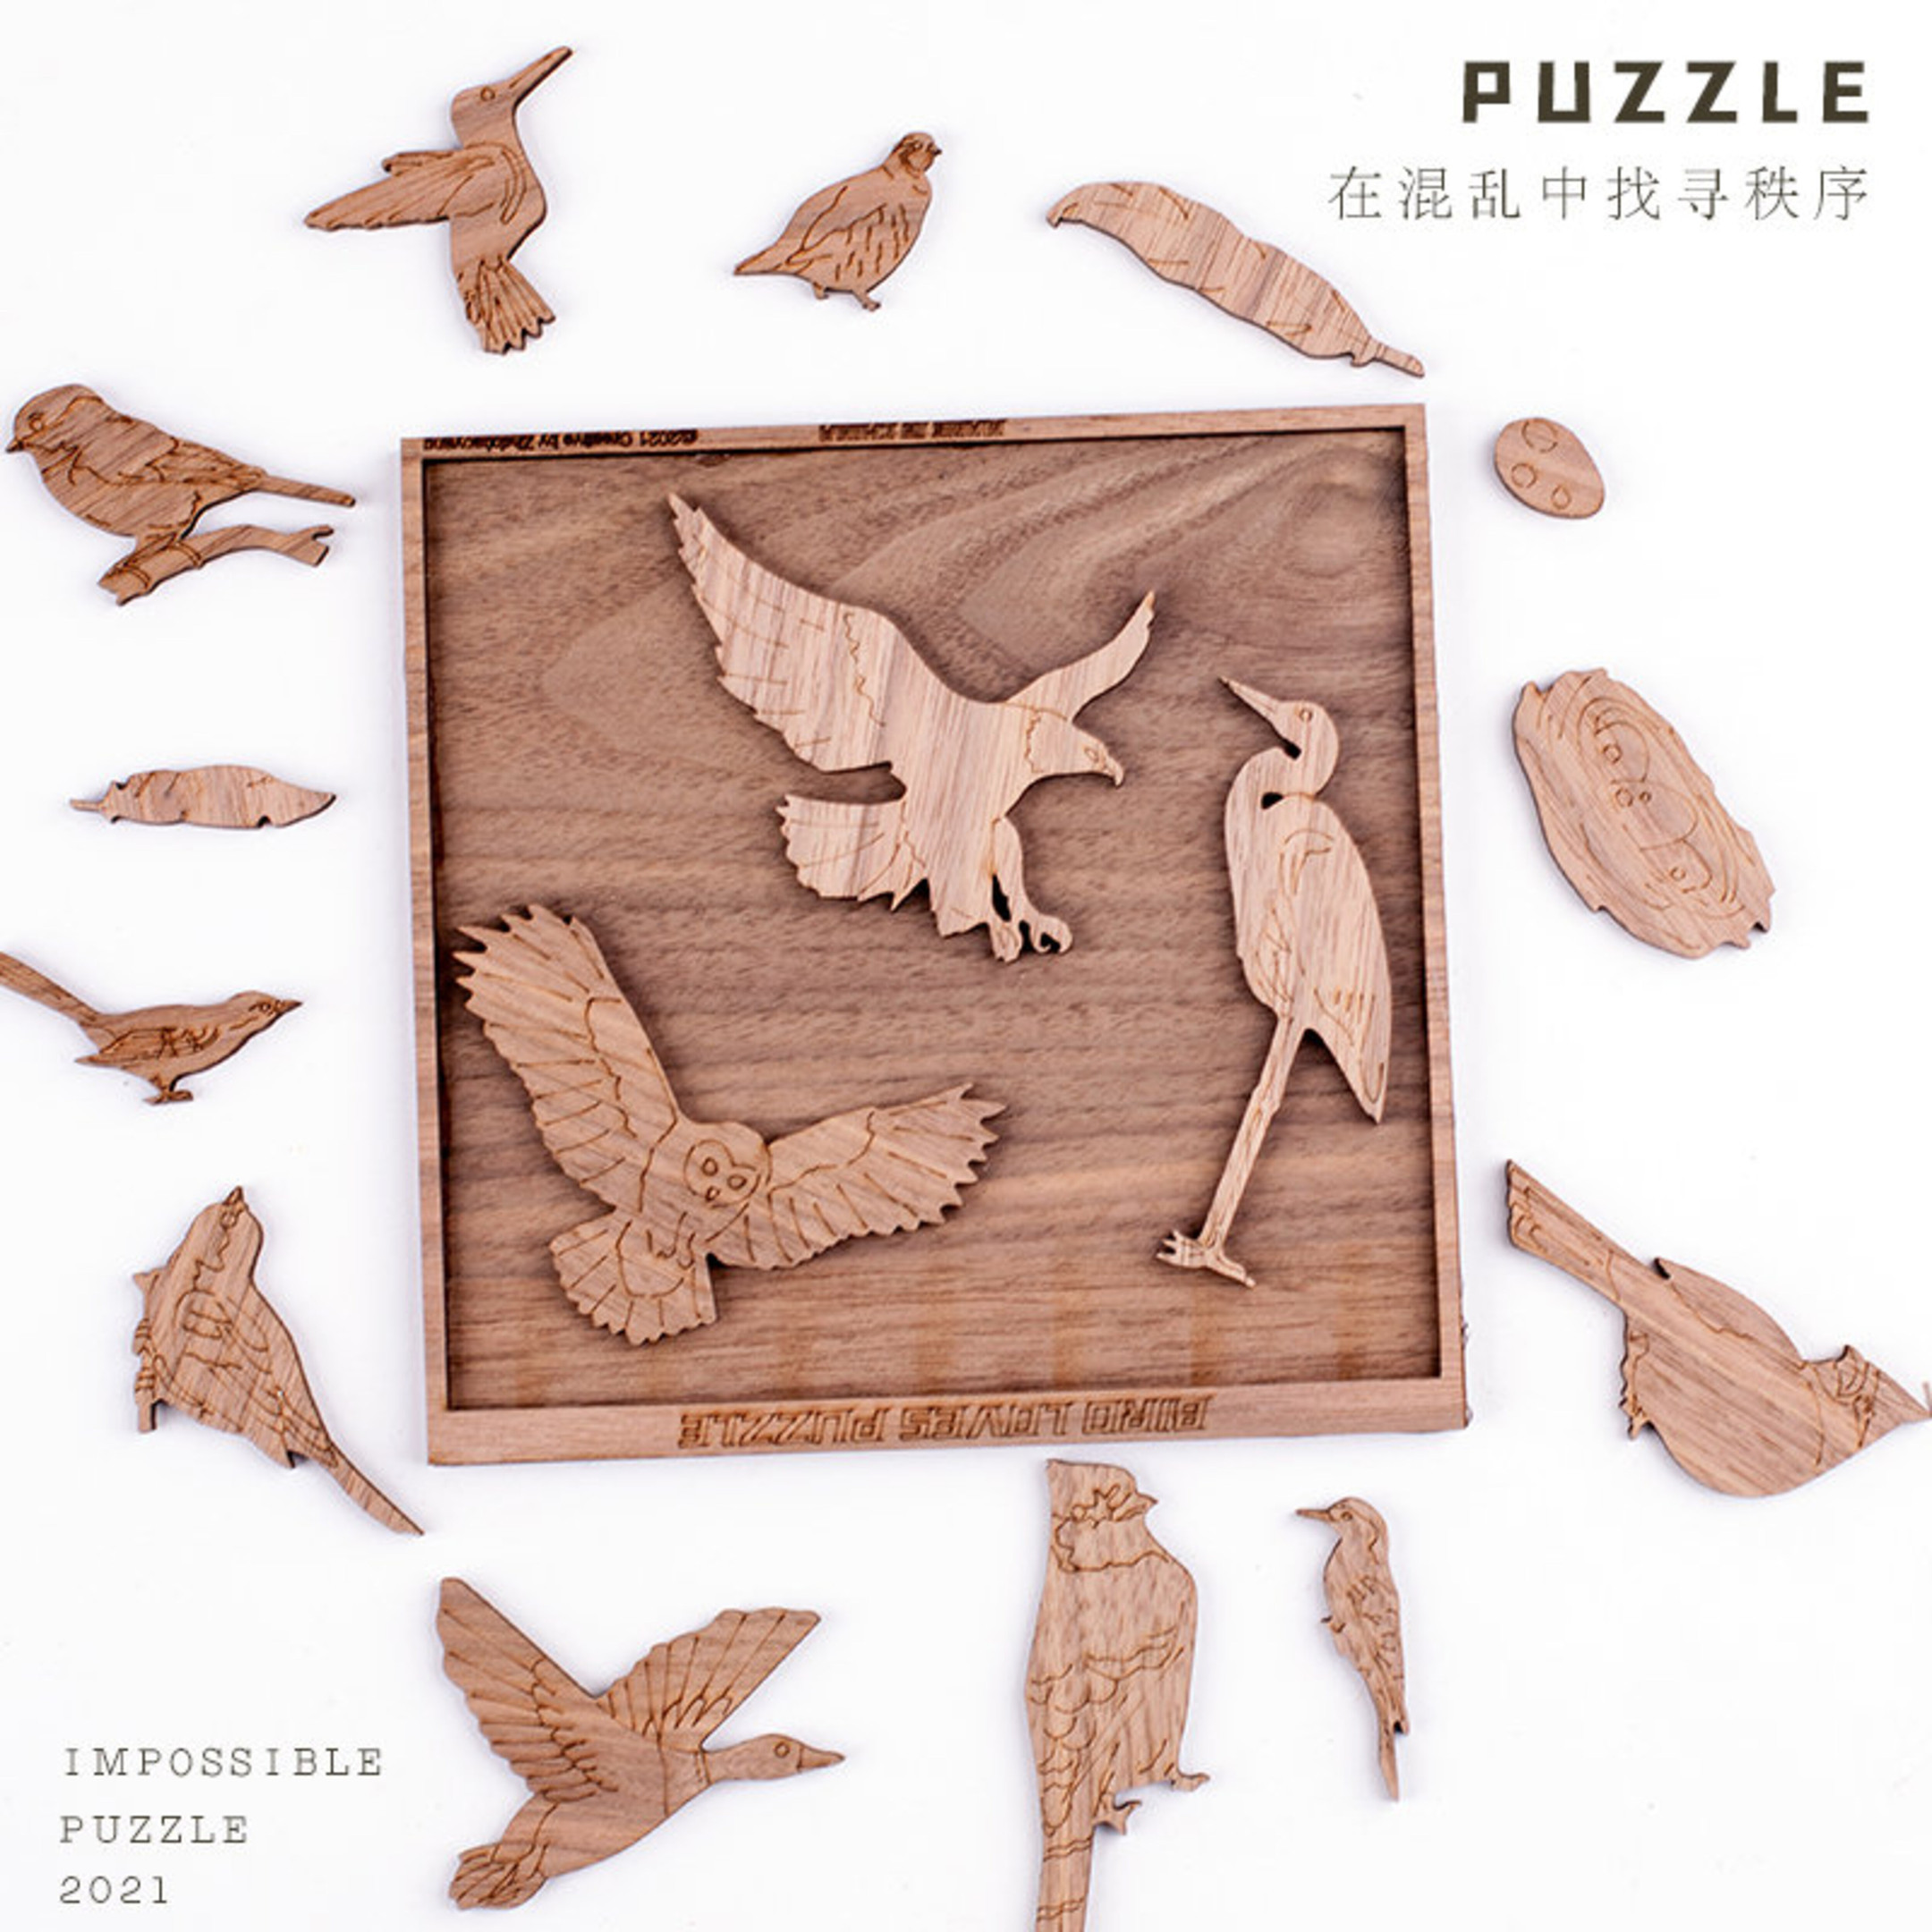 Wooden Jigsaw Puzzle, Premium Materials, Impressive Artwork, Ideal Gifts for Kids, Family Games, Kids & Adults Puzzles,bird